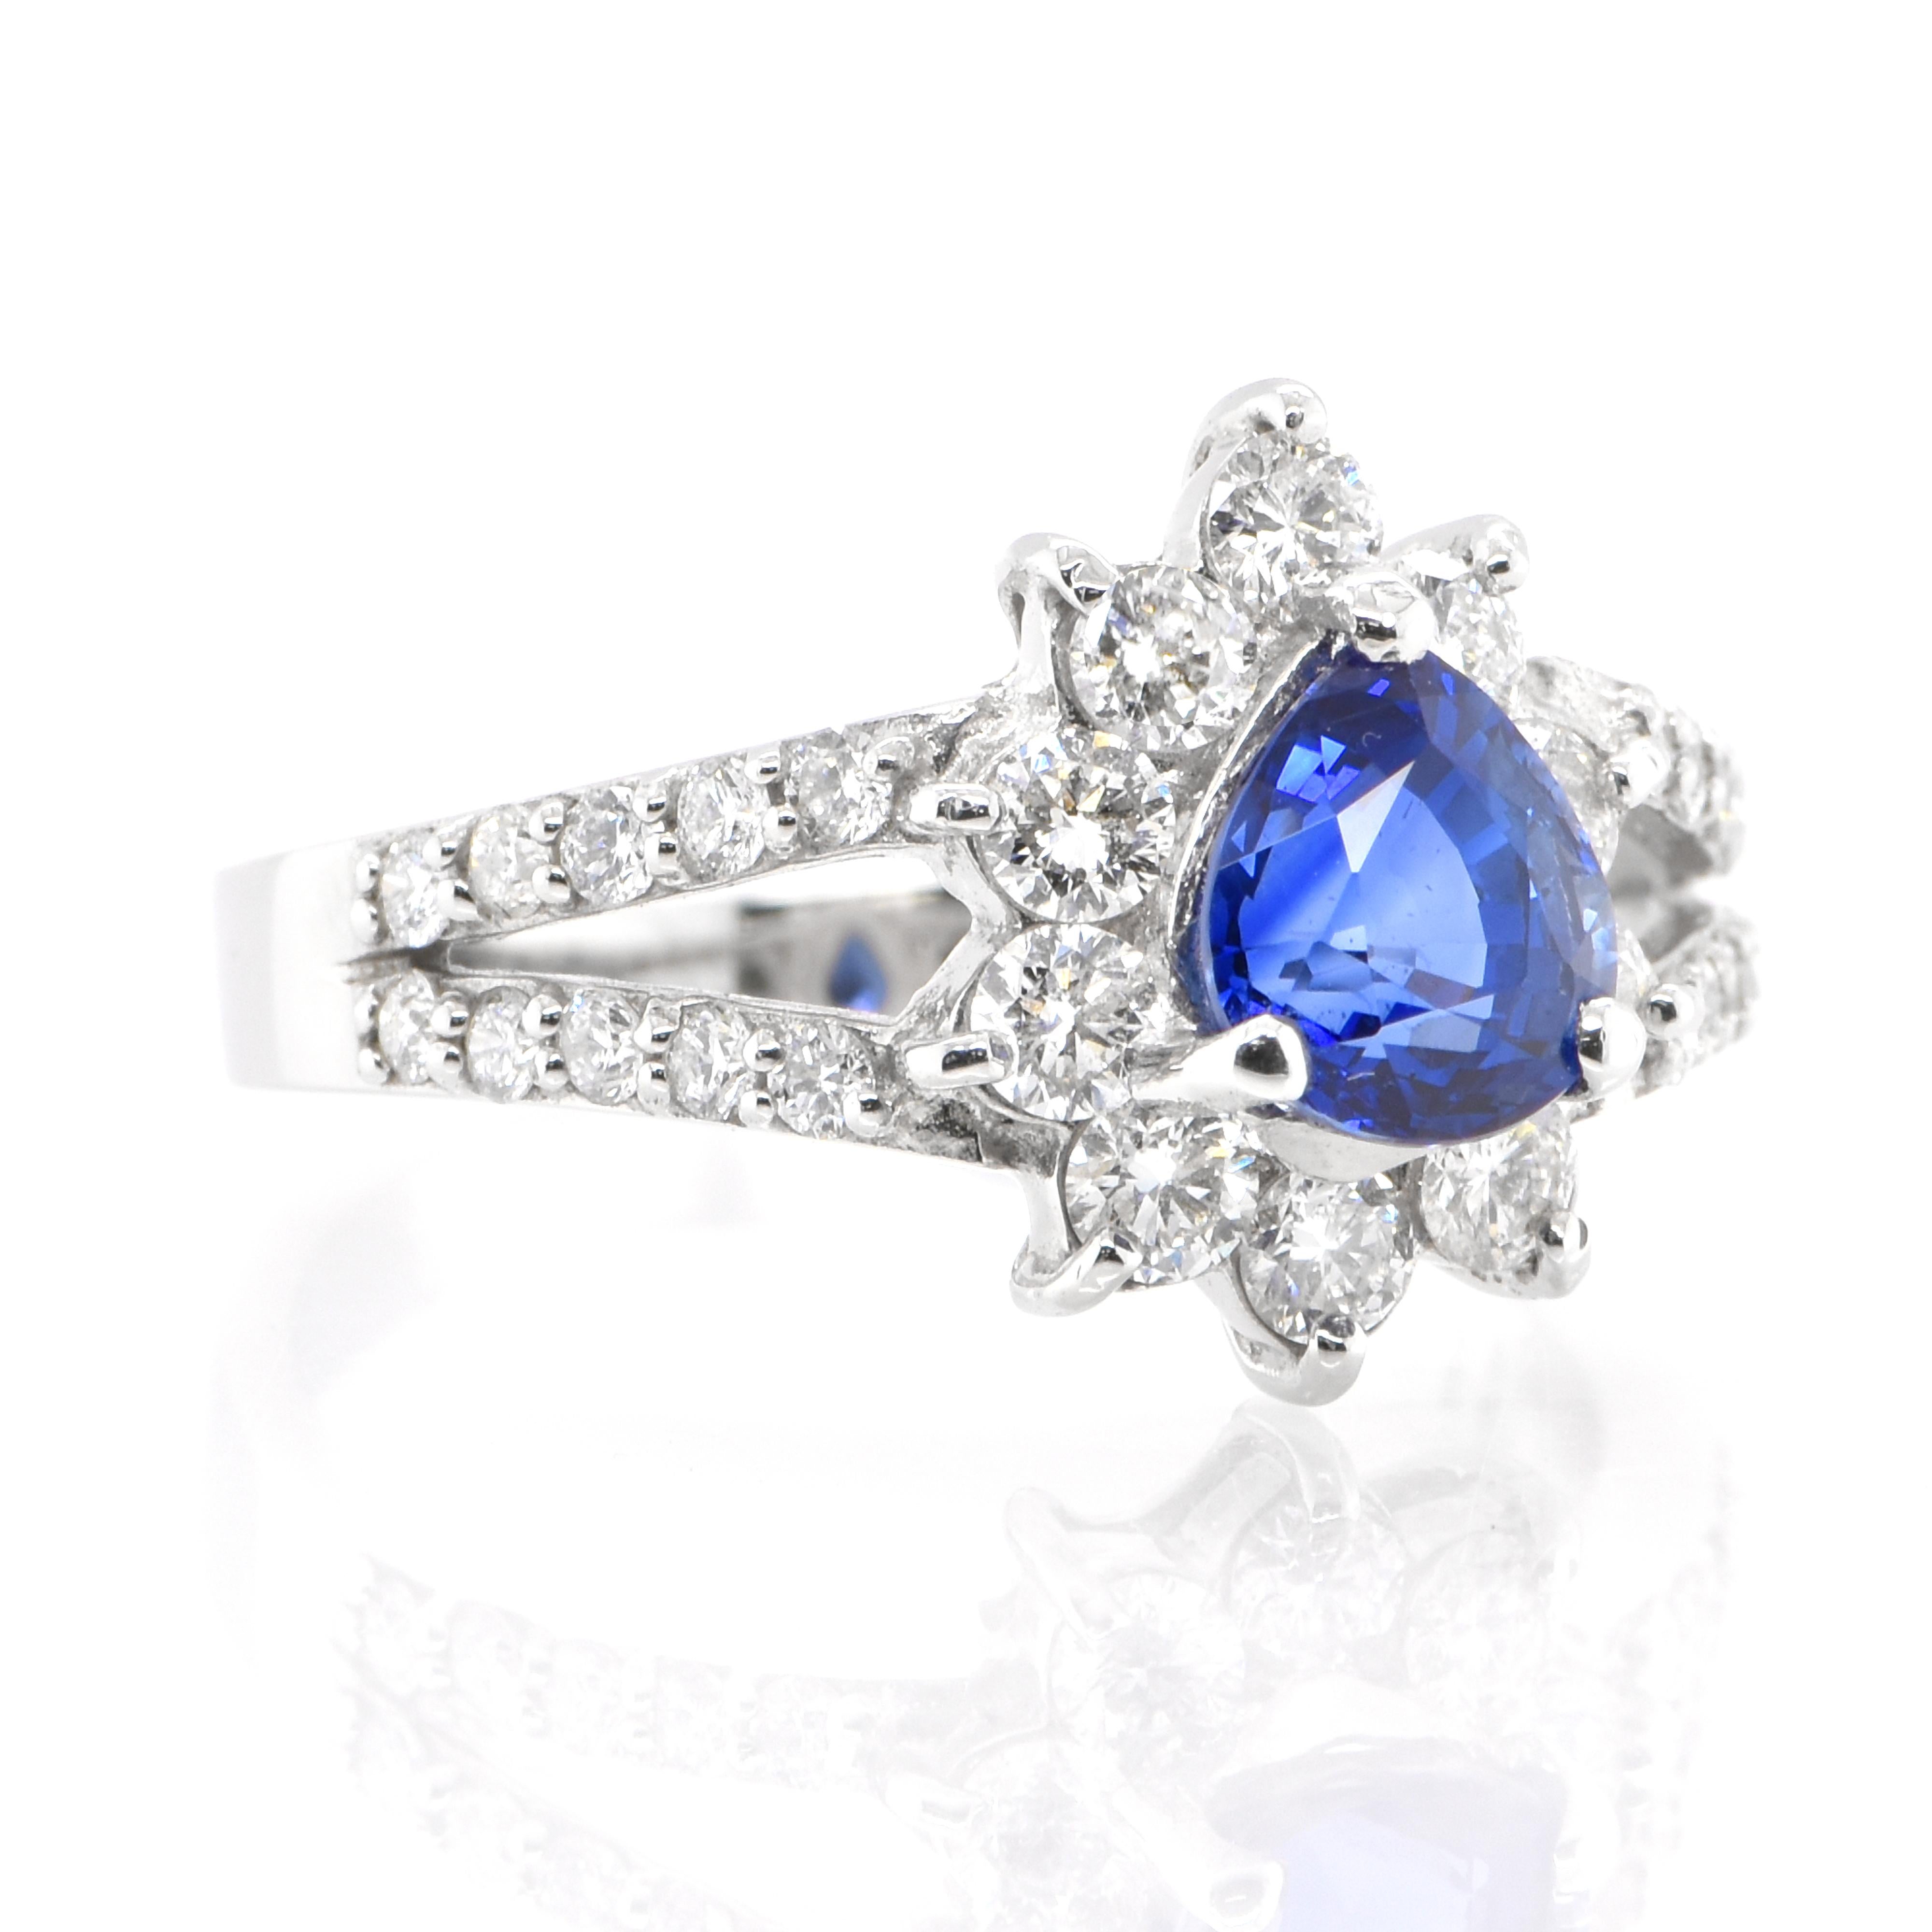 Modern 1.24 Carat Natural Blue Sapphire and Diamond Ring Set in Platinum For Sale